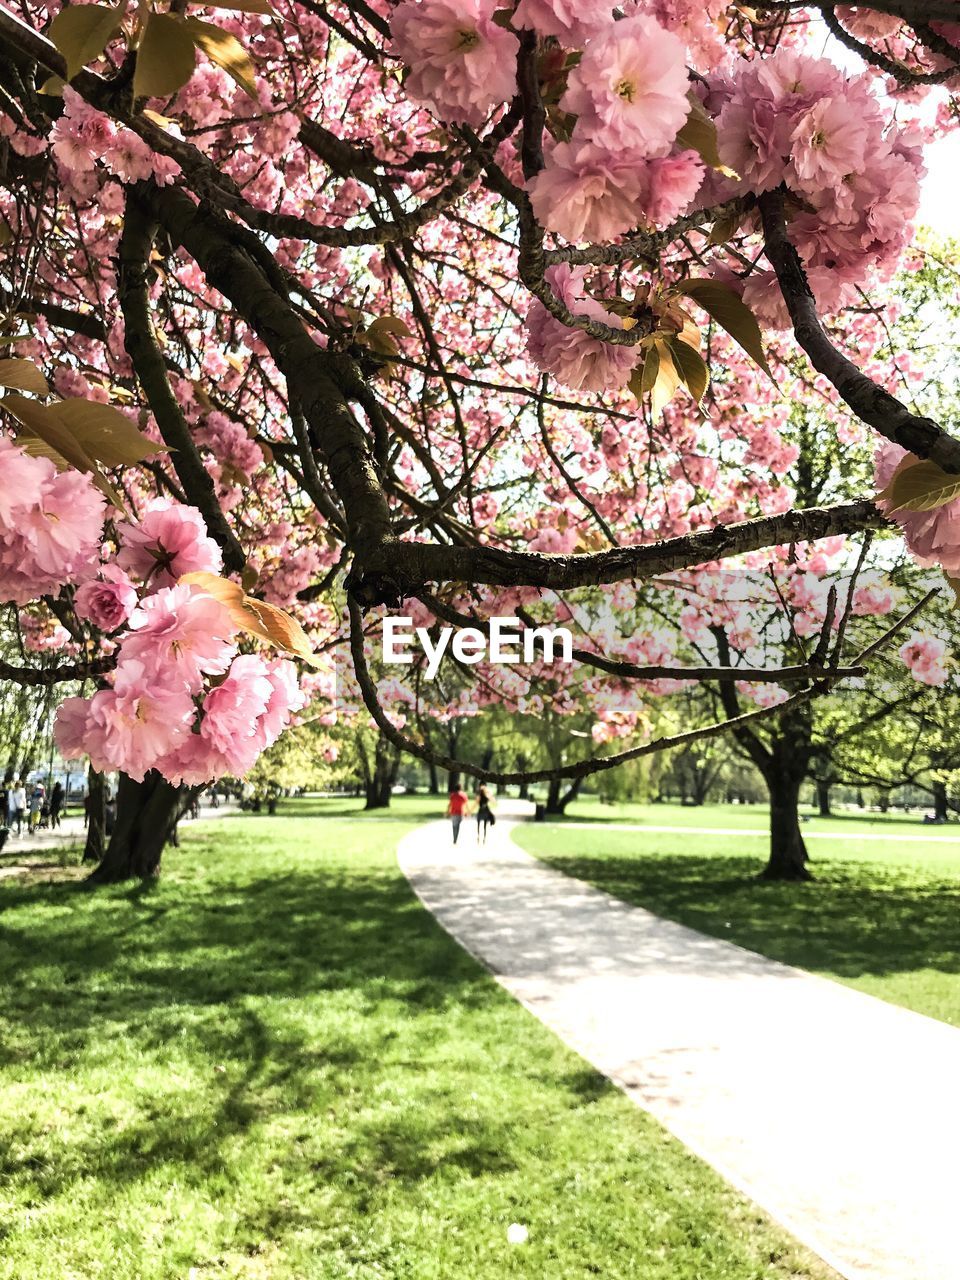 VIEW OF CHERRY BLOSSOM TREE IN PARK